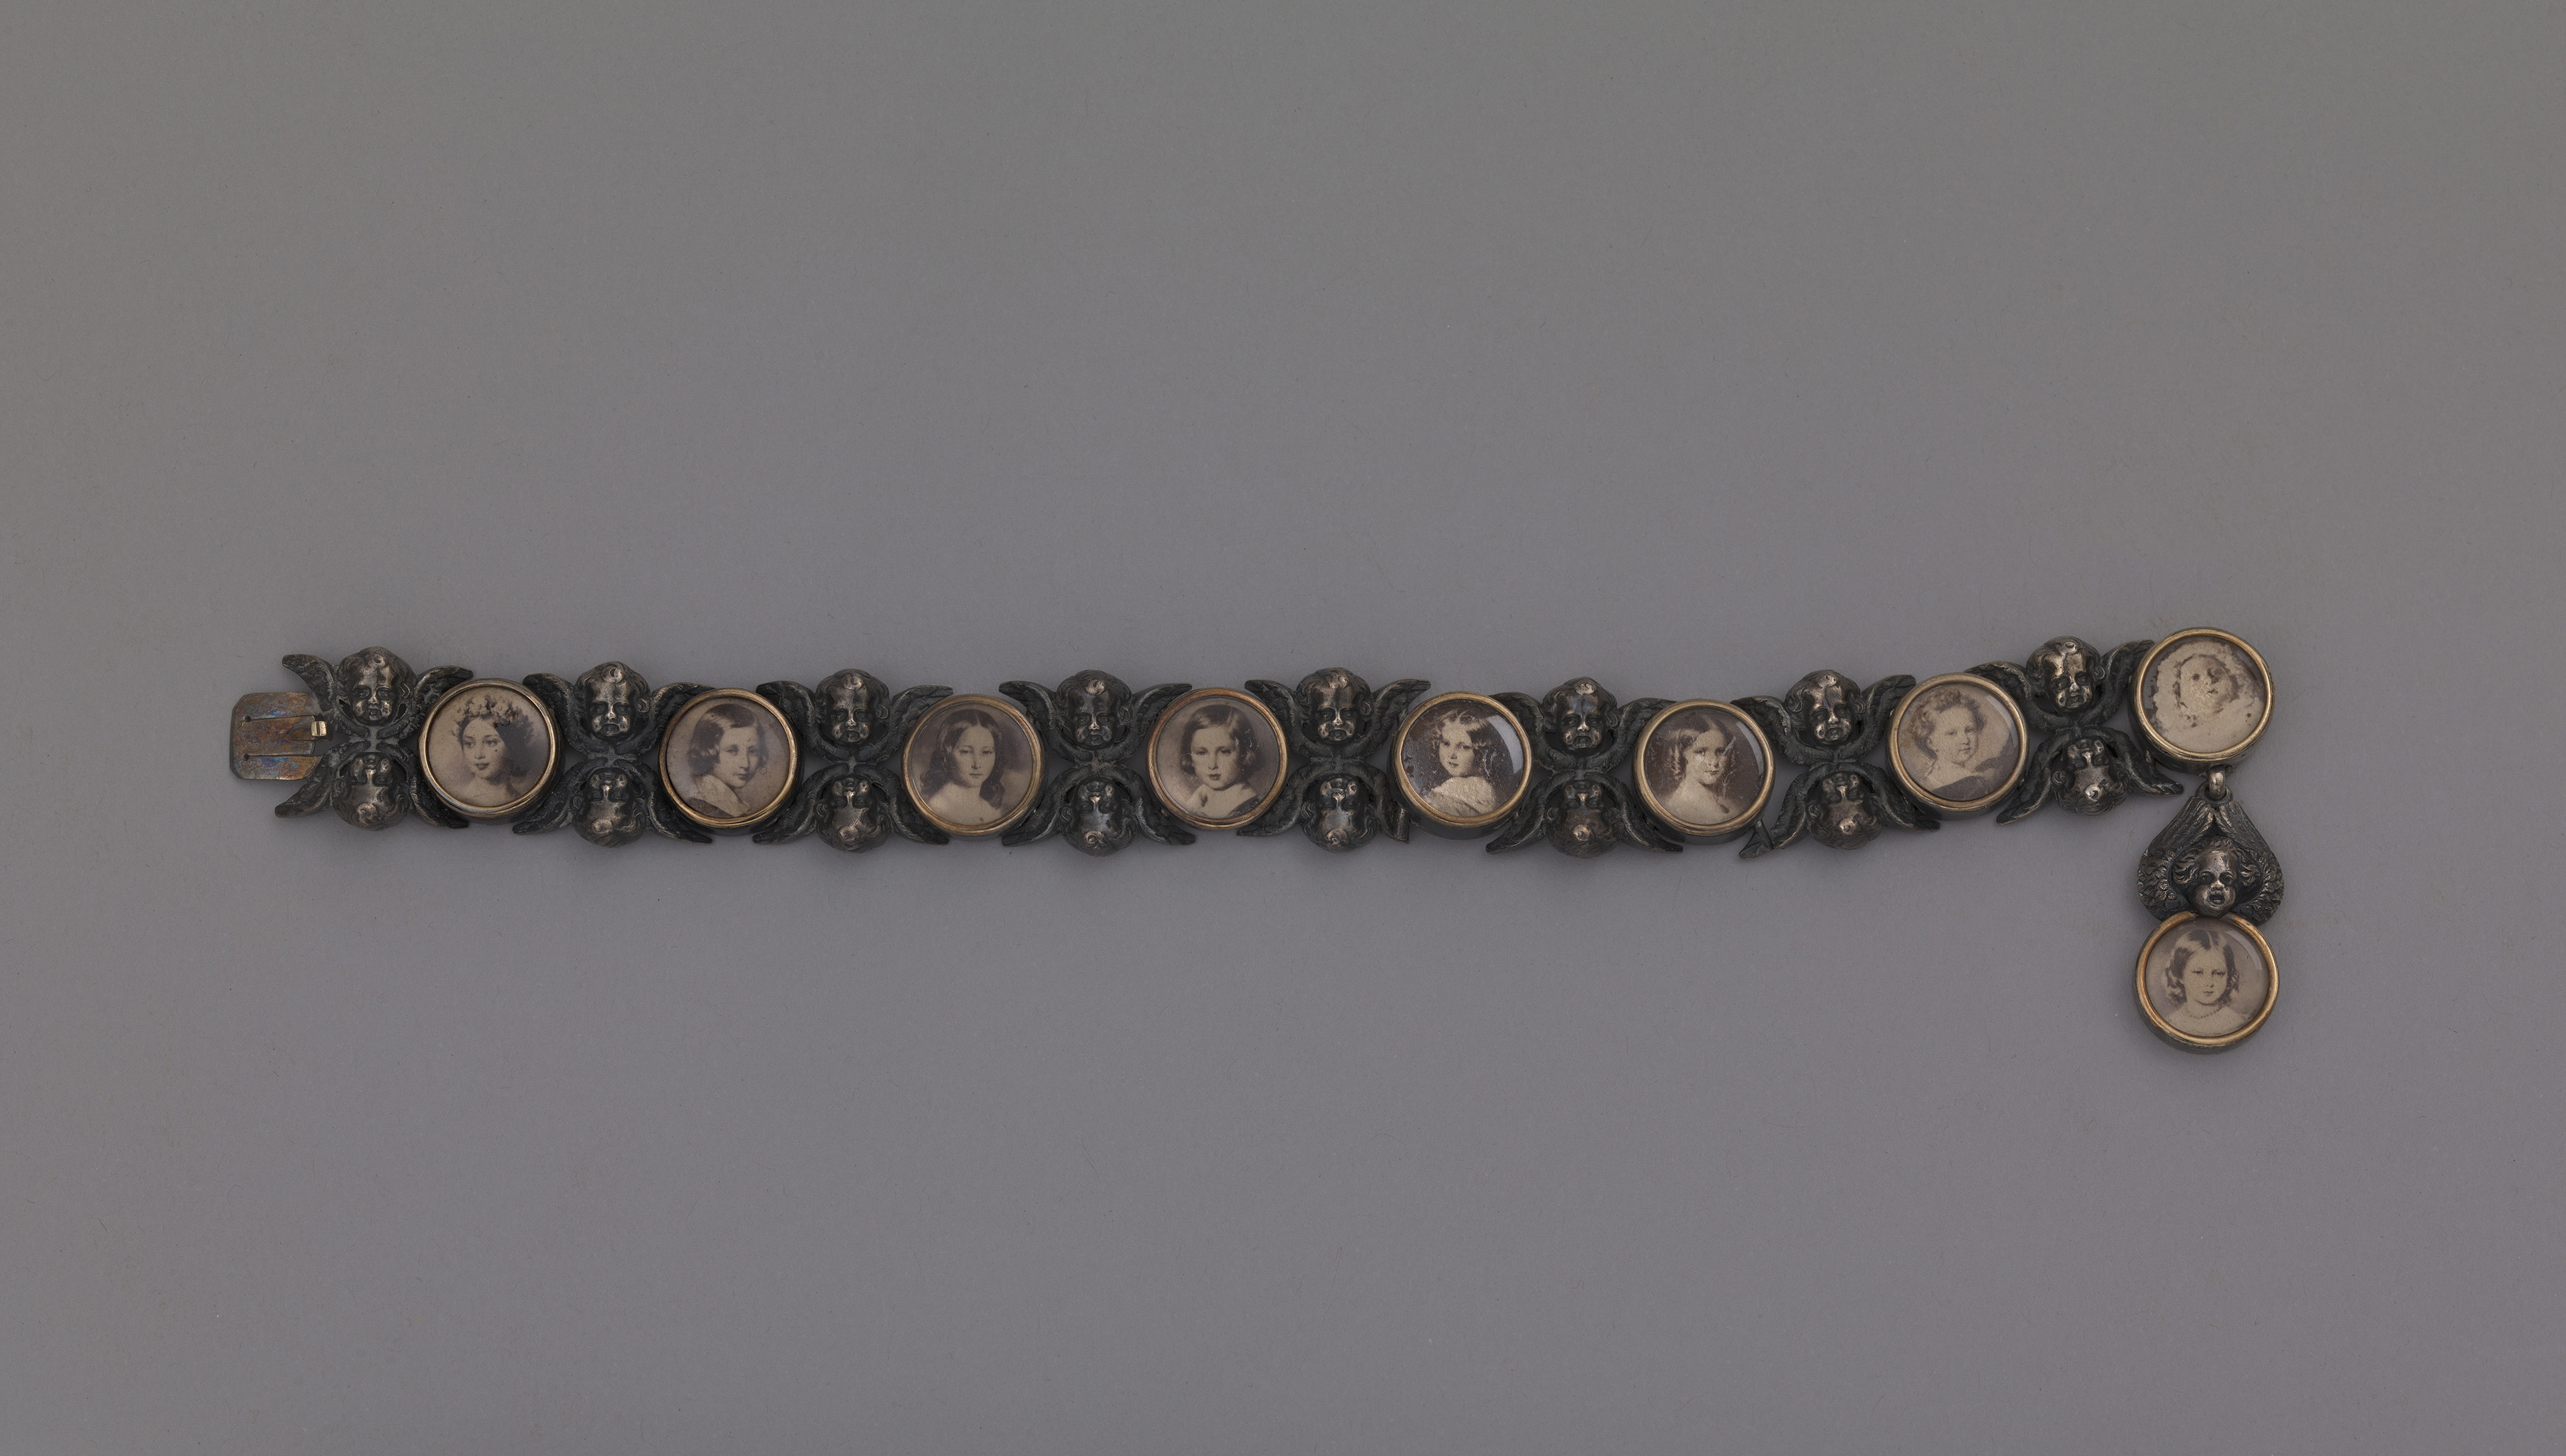 Bracelet given to Victoria by Albert